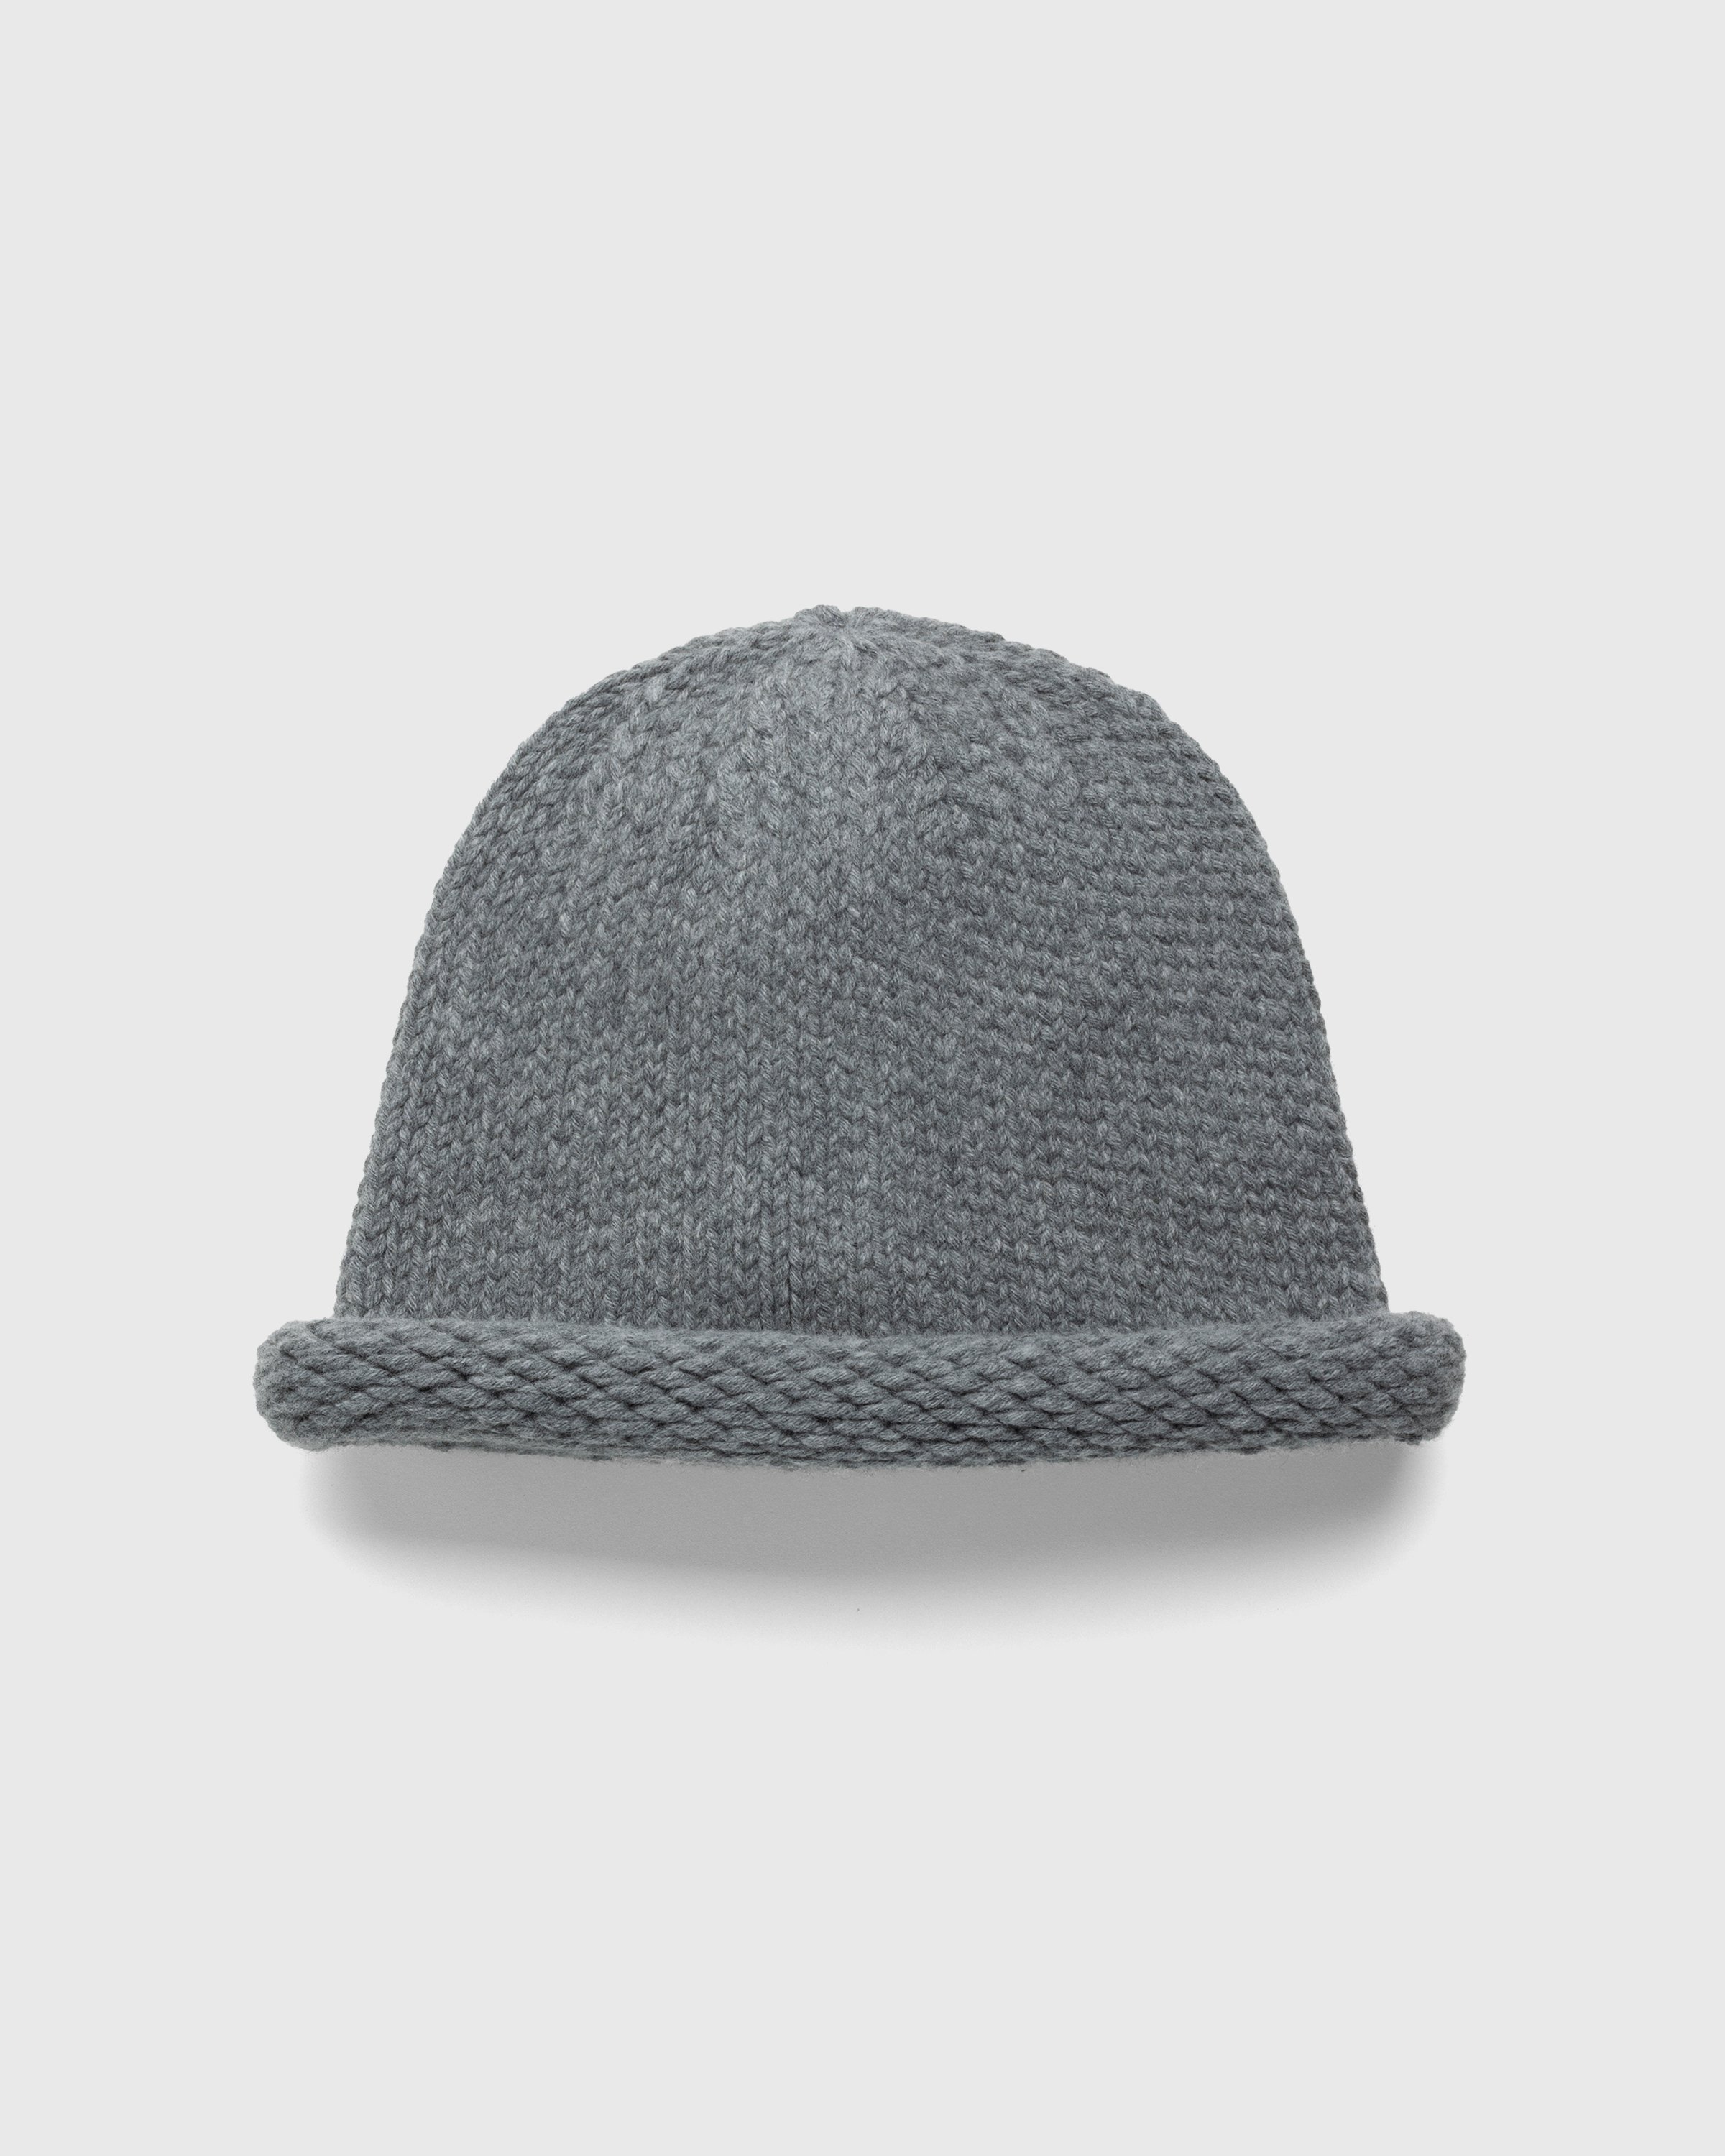 Kenzo - Wool Beanie Middle Grey - Accessories - Grey - Image 1